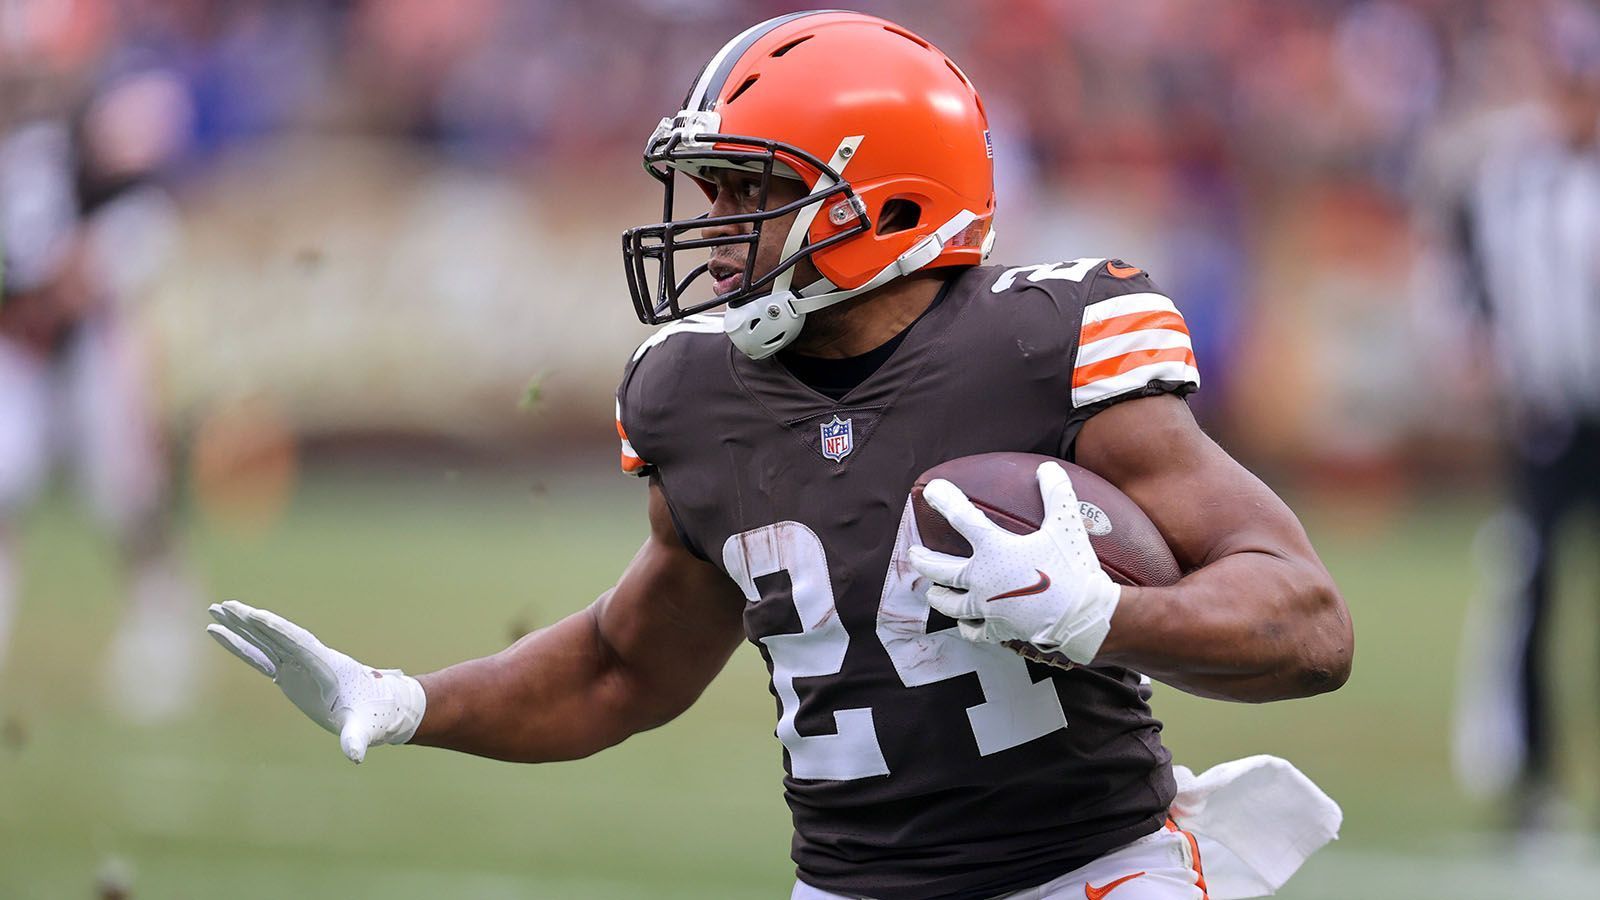 
                <strong>2. Platz (geteilt): Nick Chubb</strong><br>
                &#x2022; Team: Cleveland Browns<br>&#x2022; Position: Running Back<br>&#x2022; <strong>Overall Rating: 96</strong><br>&#x2022; Key Stats: Speed 92 - Acceleration 91 - Agility 83<br>
              